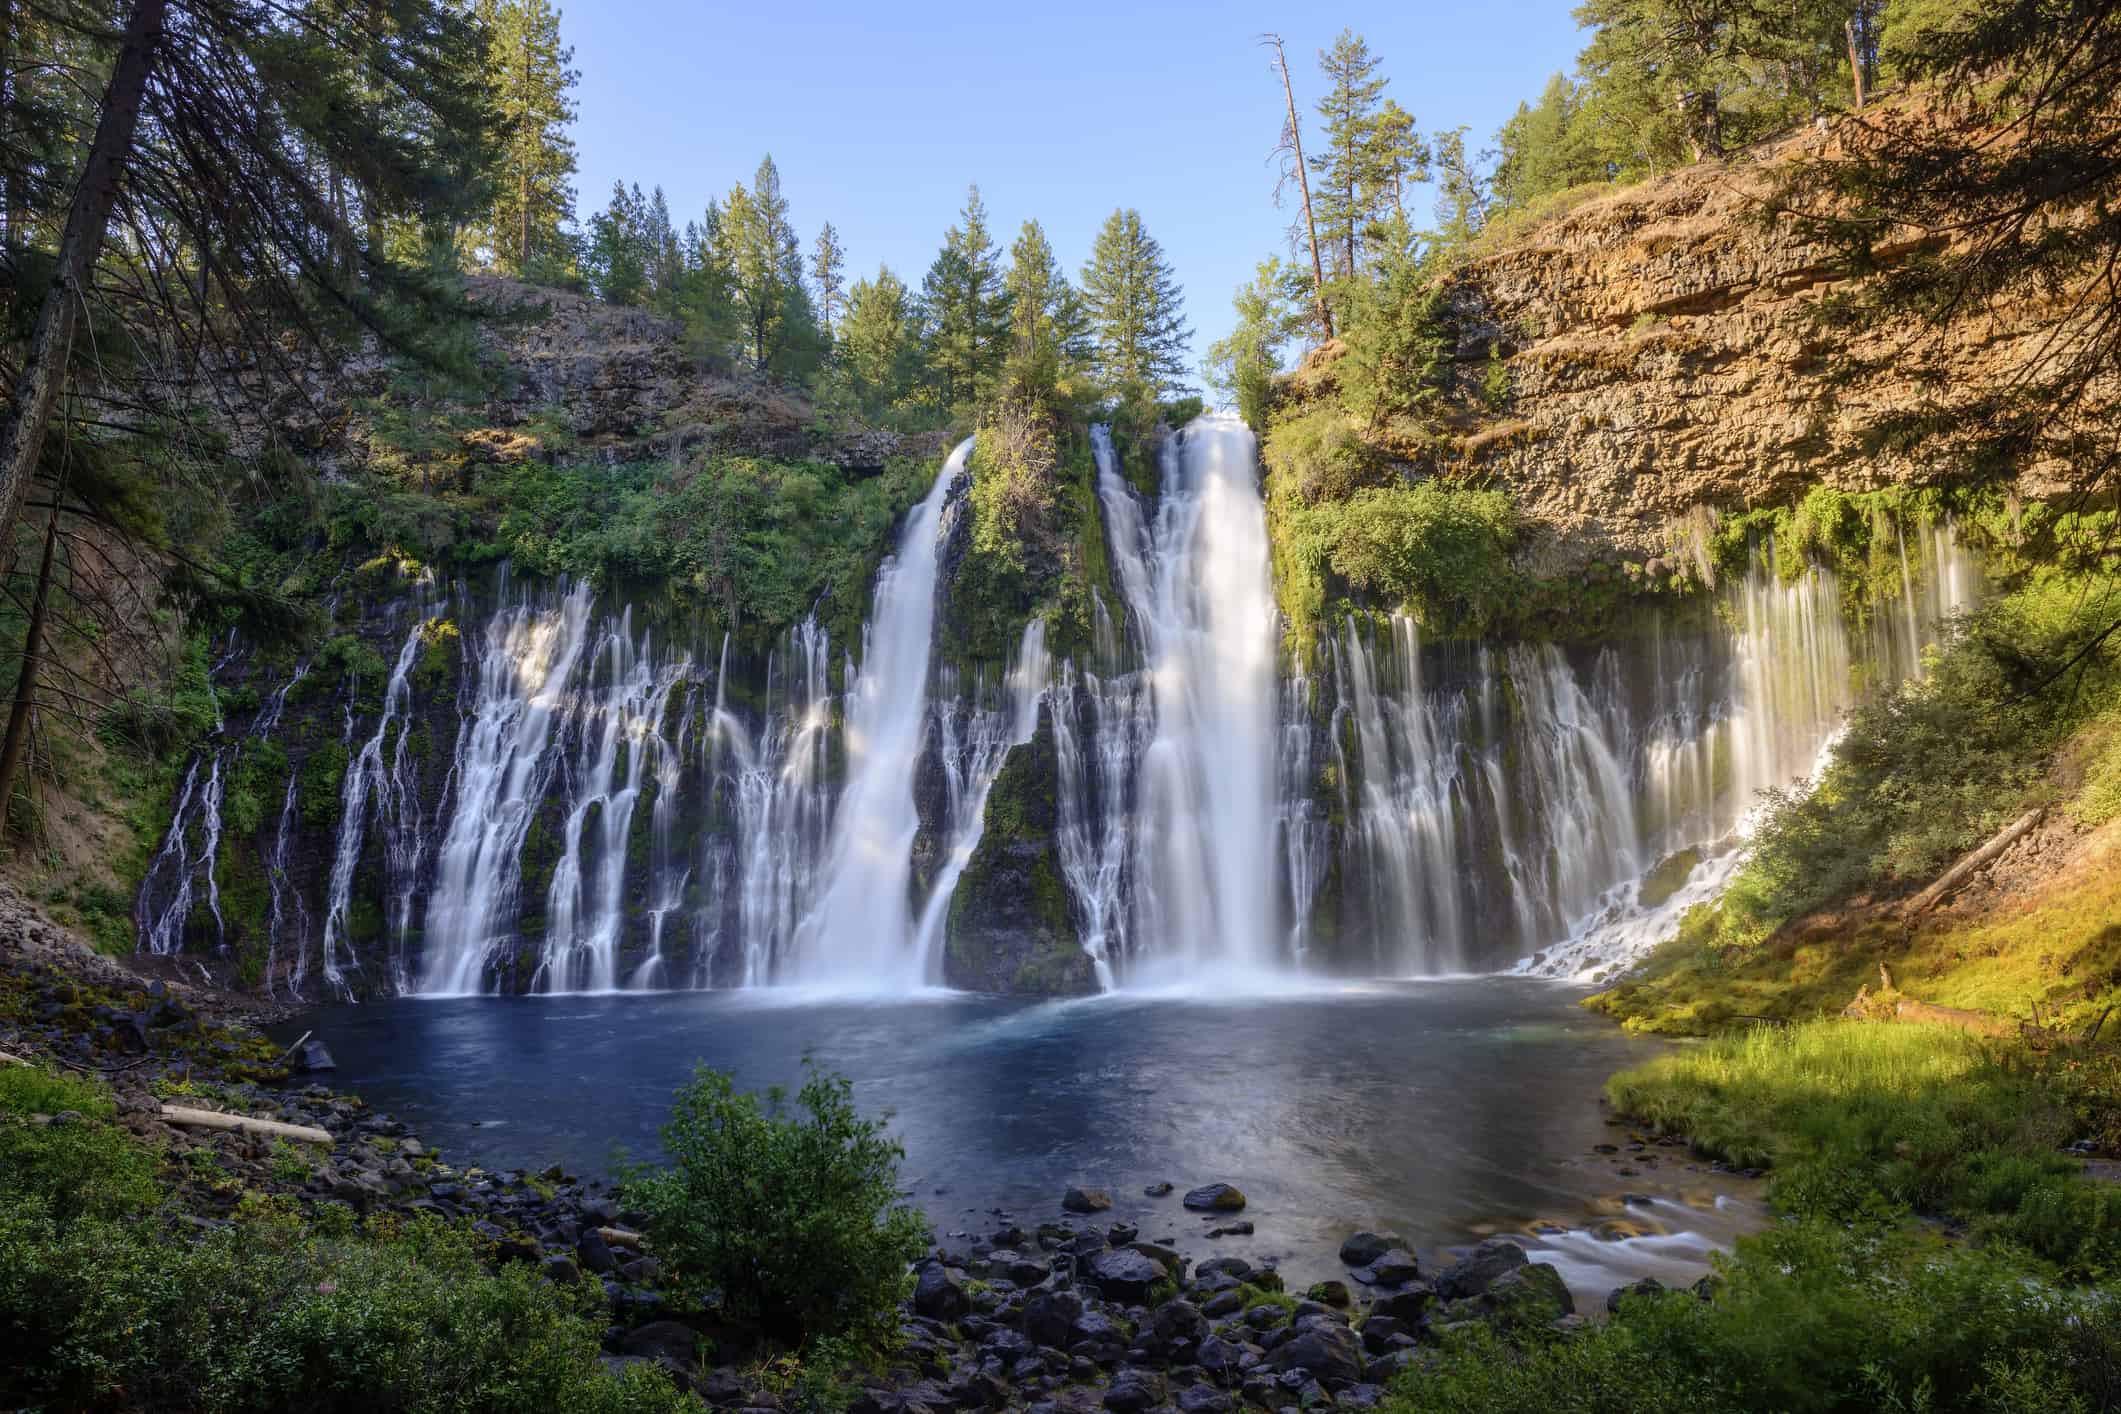 The beautiful cascading waters of Burney Falls